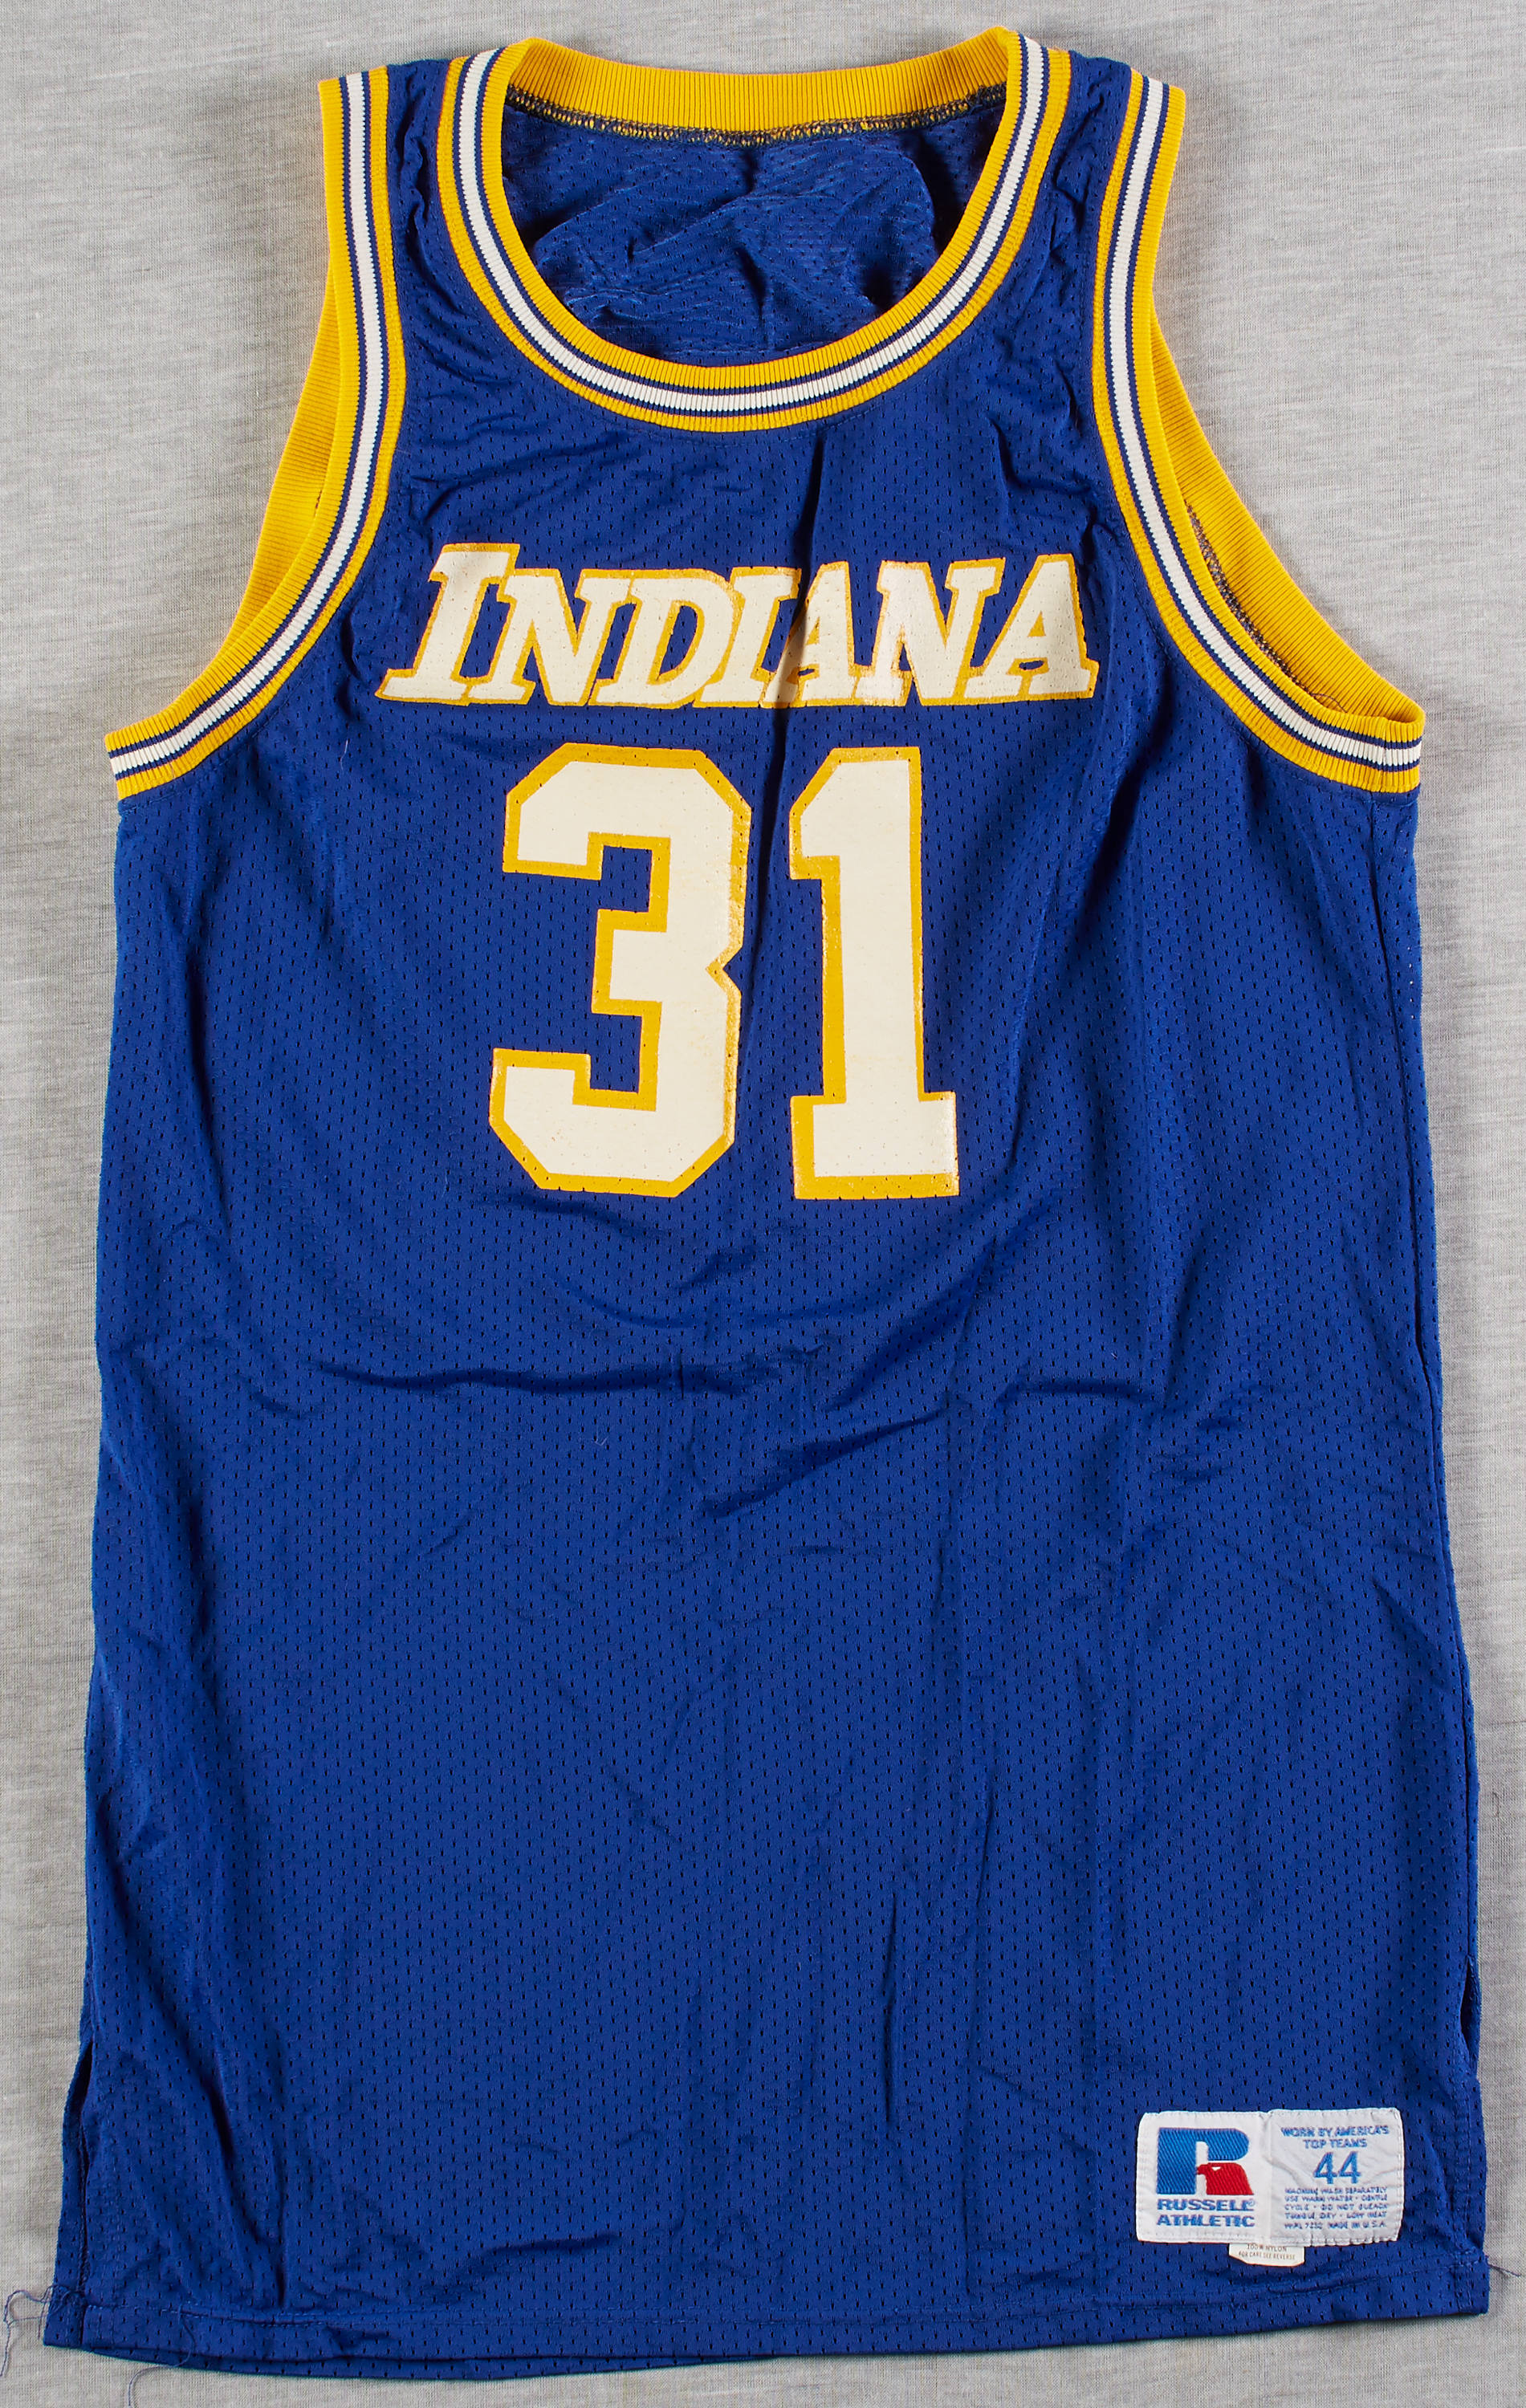 1990s Indiana Pacers Game Issued Navy White Practice Jersey 2XL DP54568